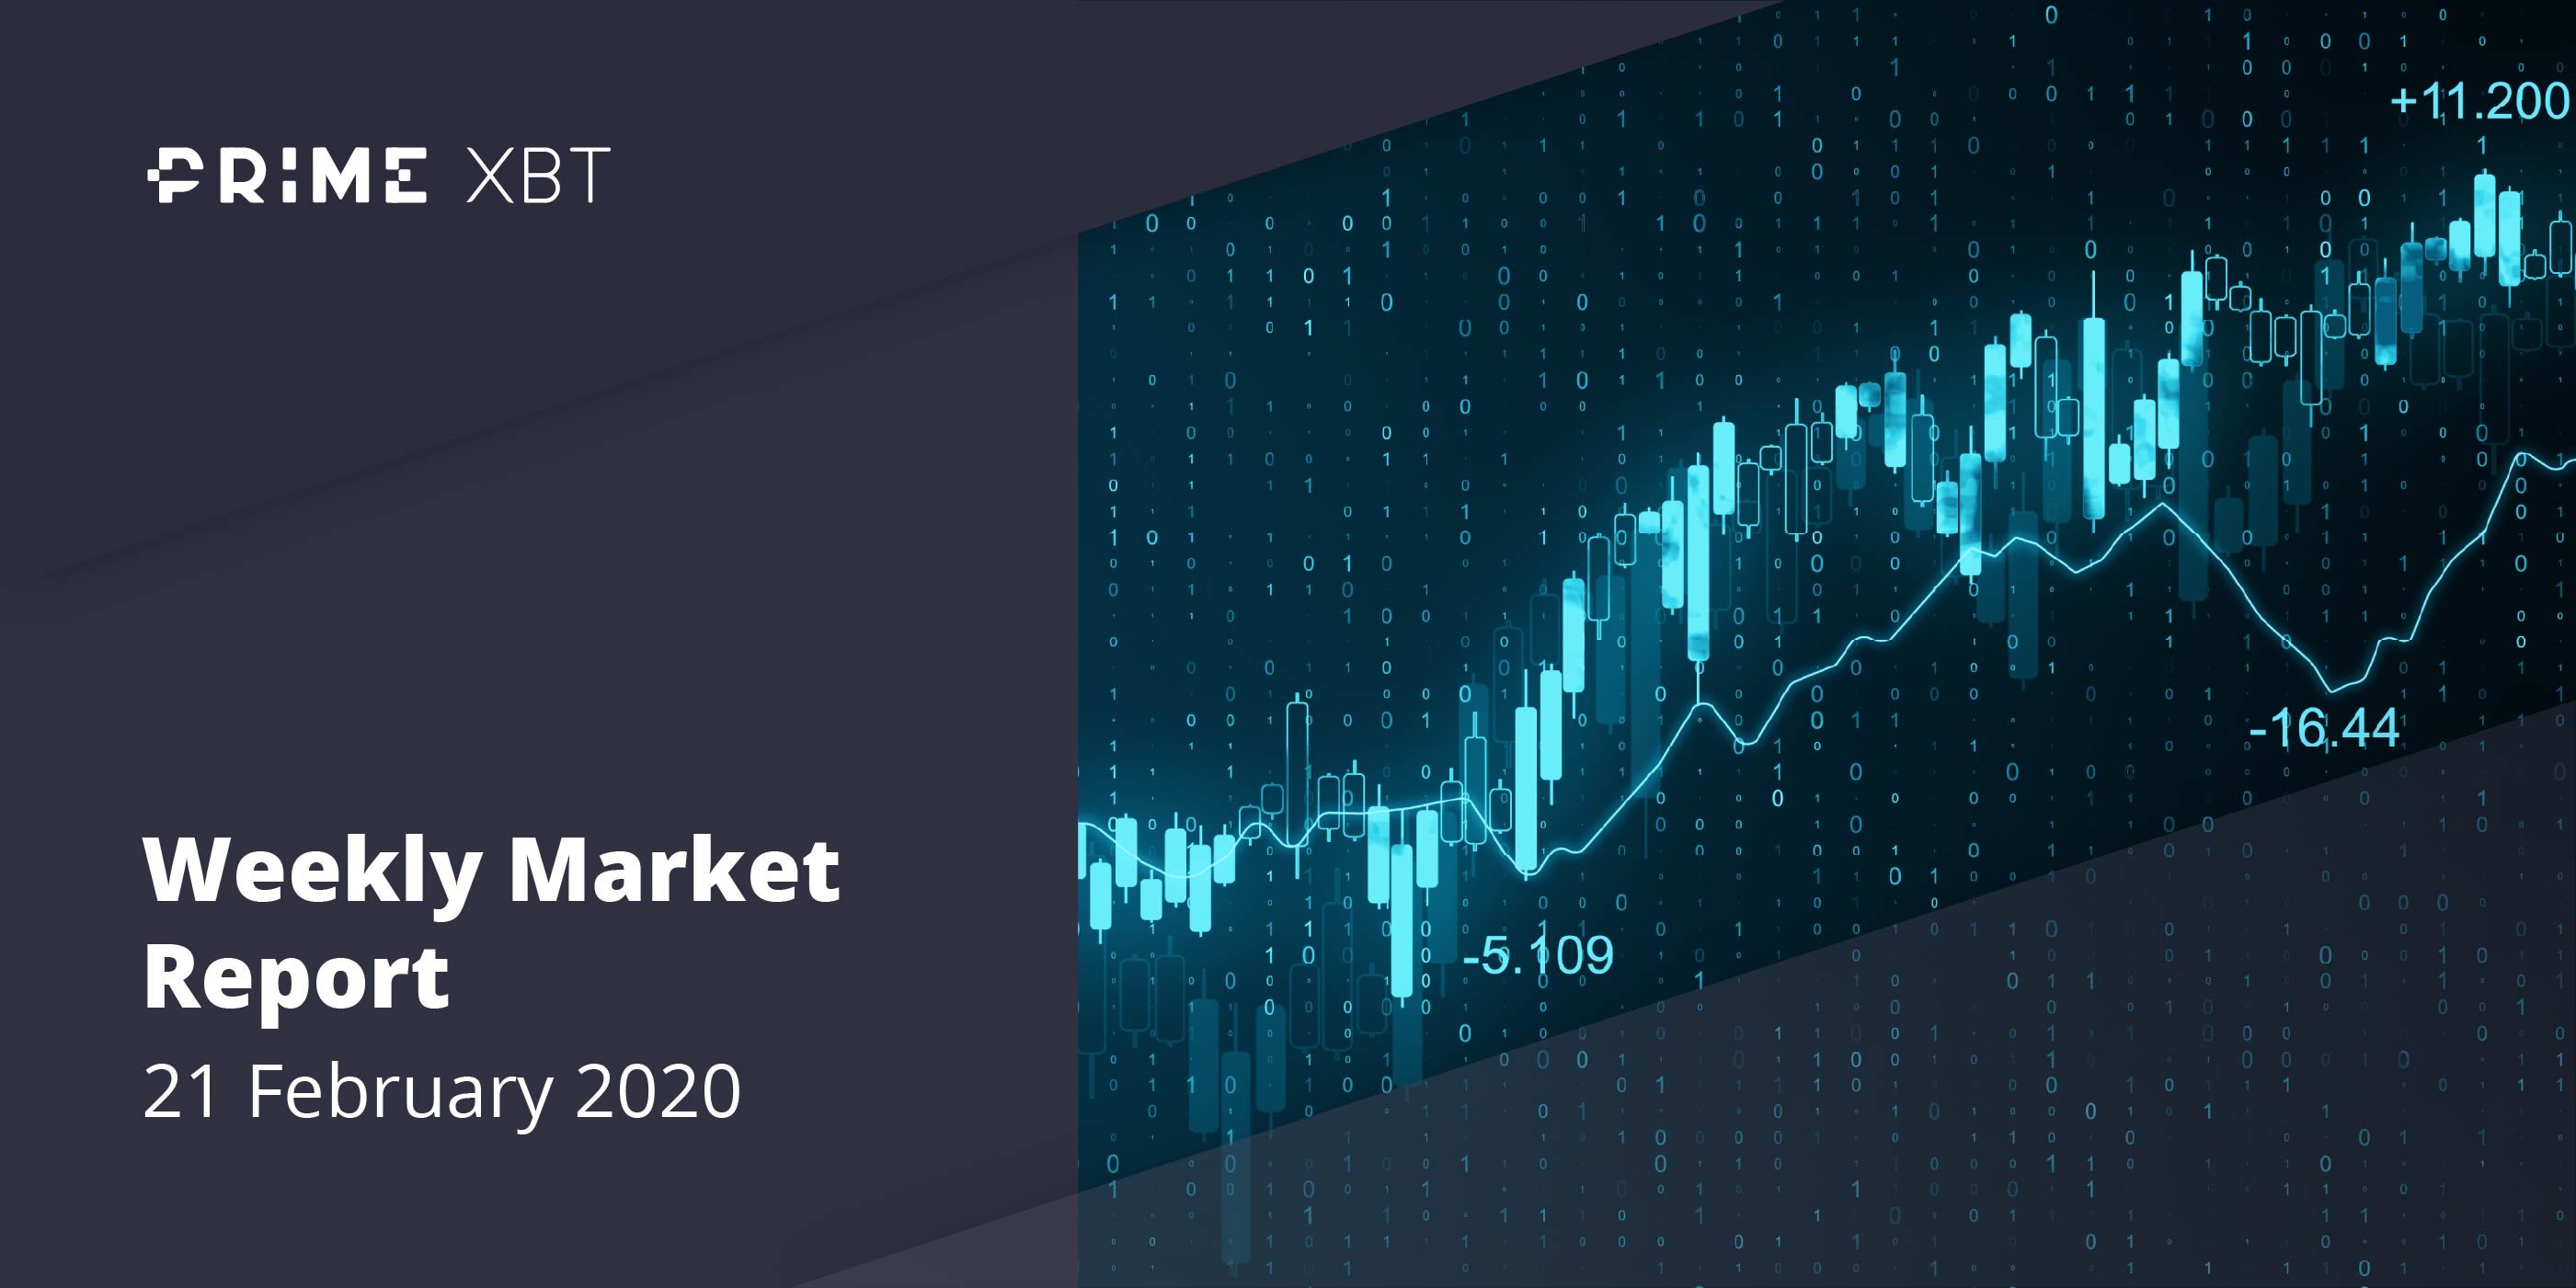 Crypto Market Report: Bitcoin’s First Red Week, DeFi Under Pressure, But BTC Volume Keep Rising with Institutional Interest - 21.02.20